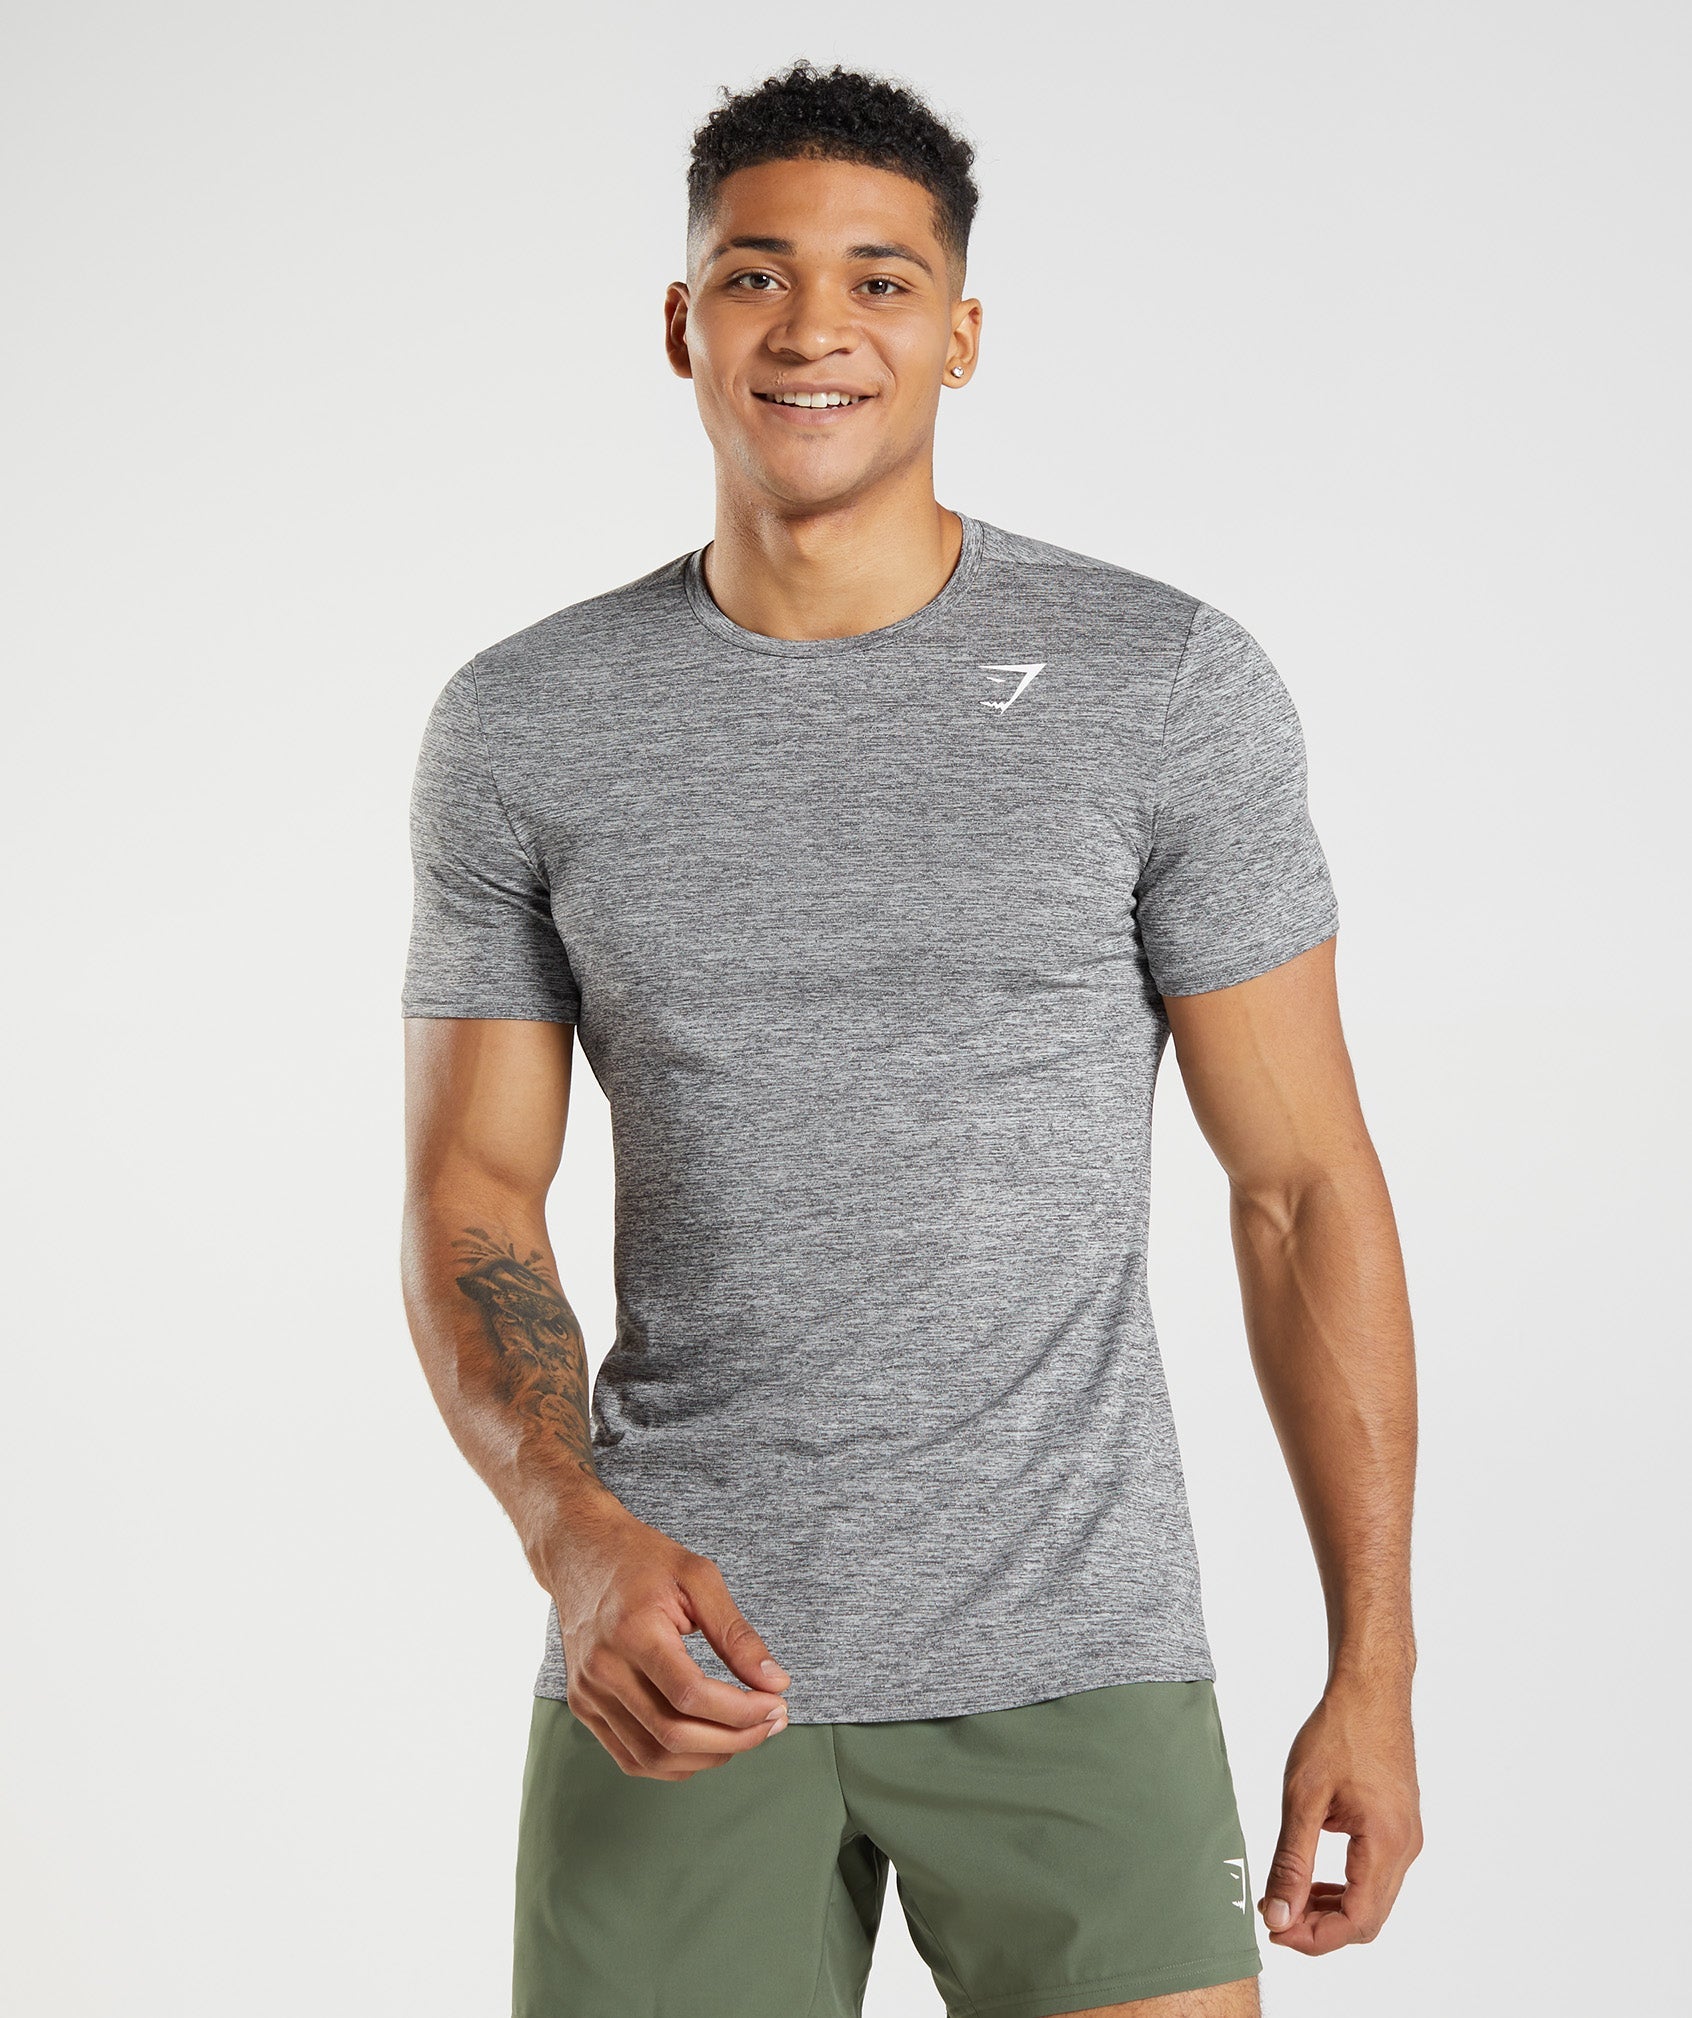 The Gymshark Arrival Collection Just Got Even Better